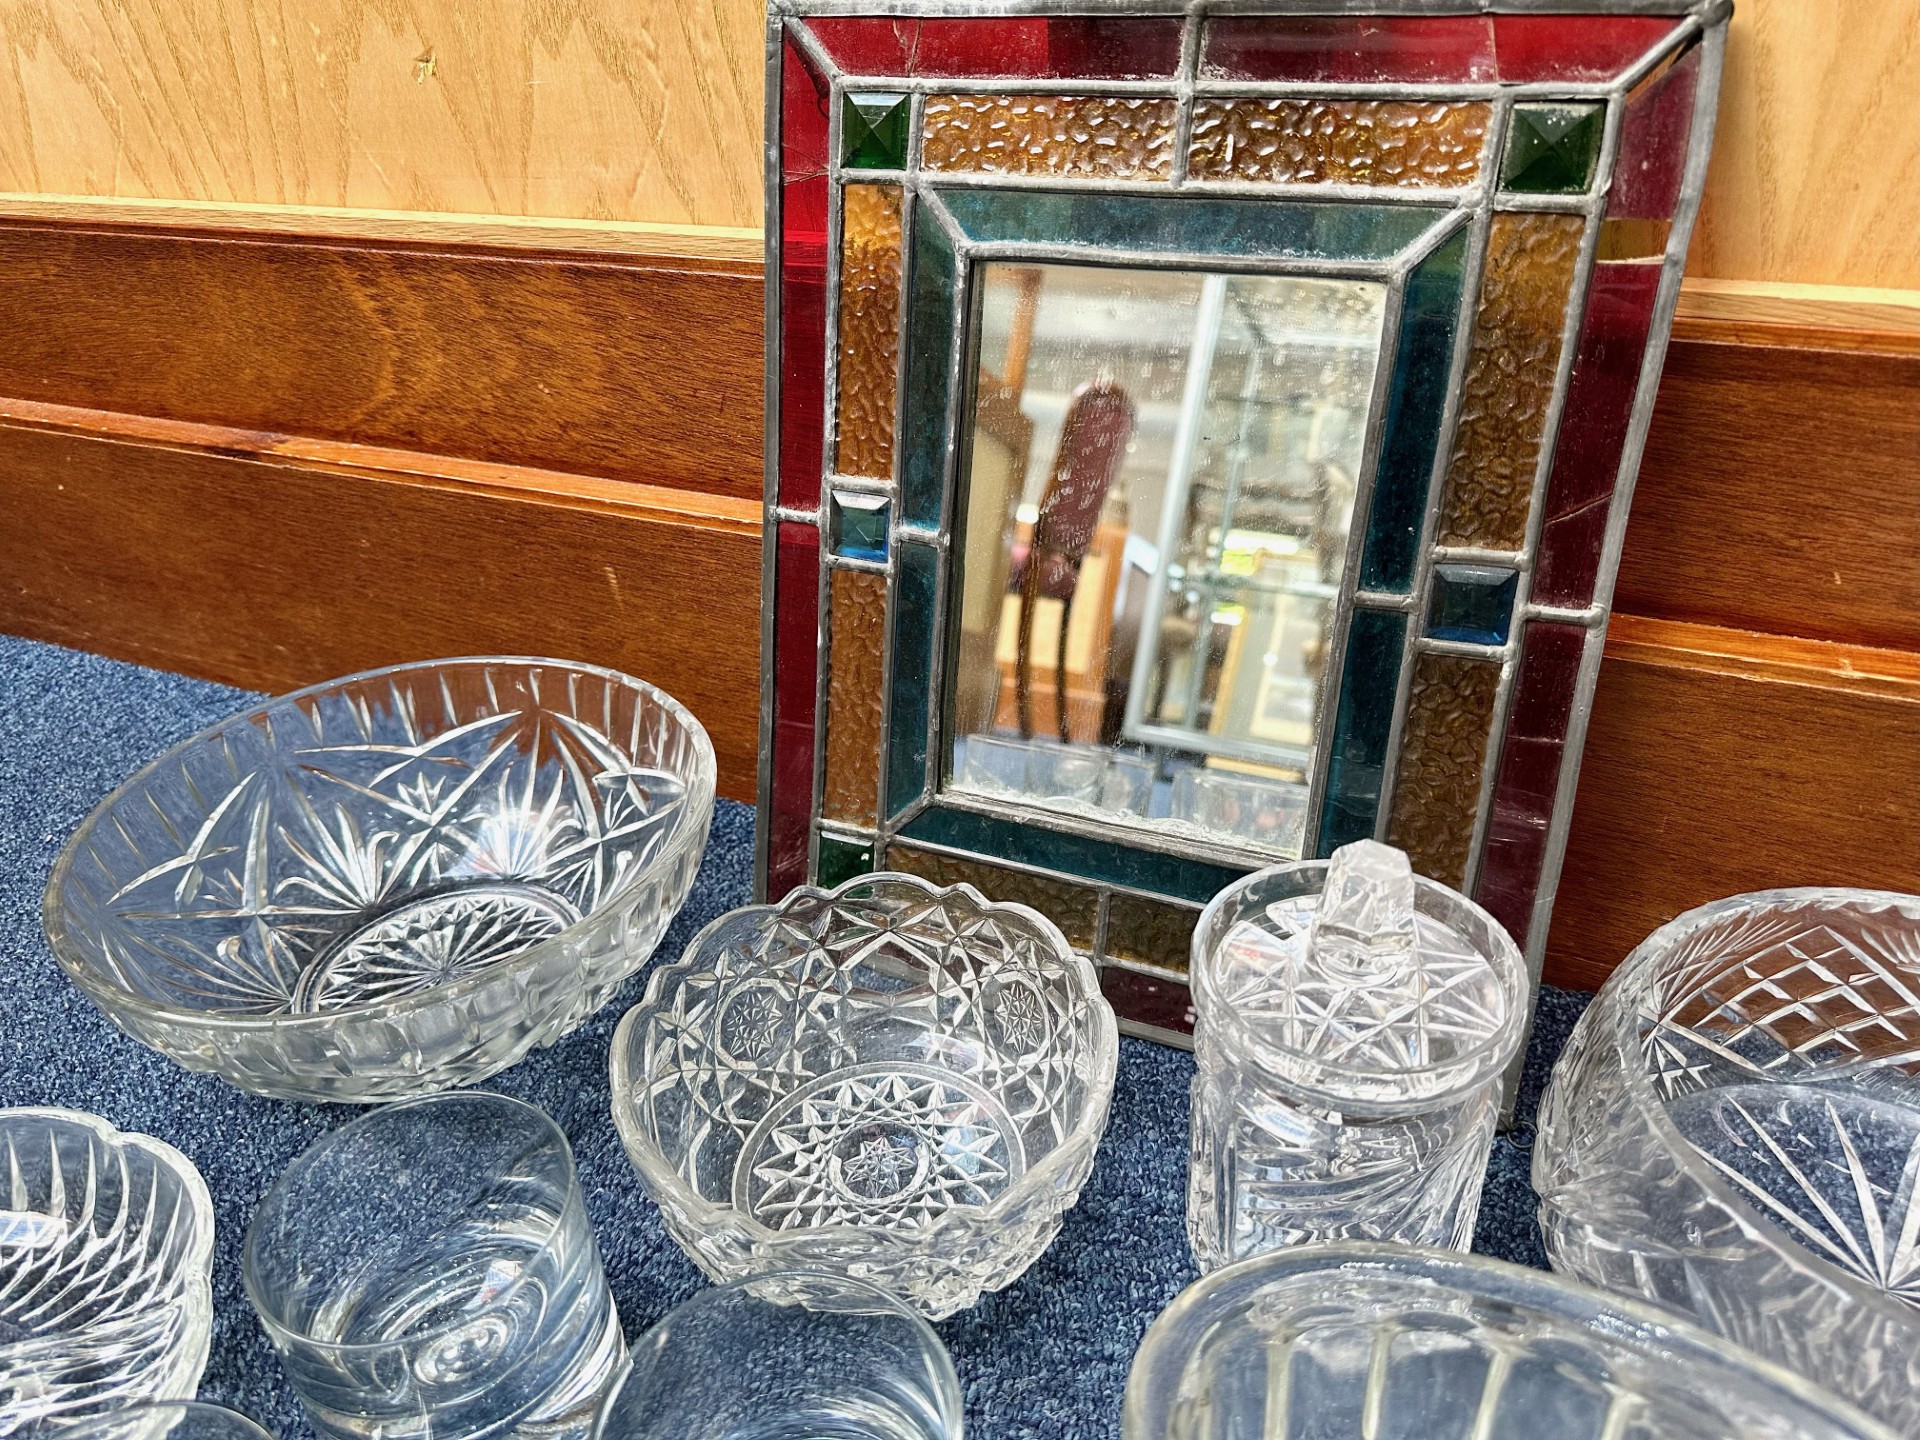 Collection of Vintage Glassware, including jelly moulds, stained glass edged mirror, bowls, lidded - Image 3 of 3